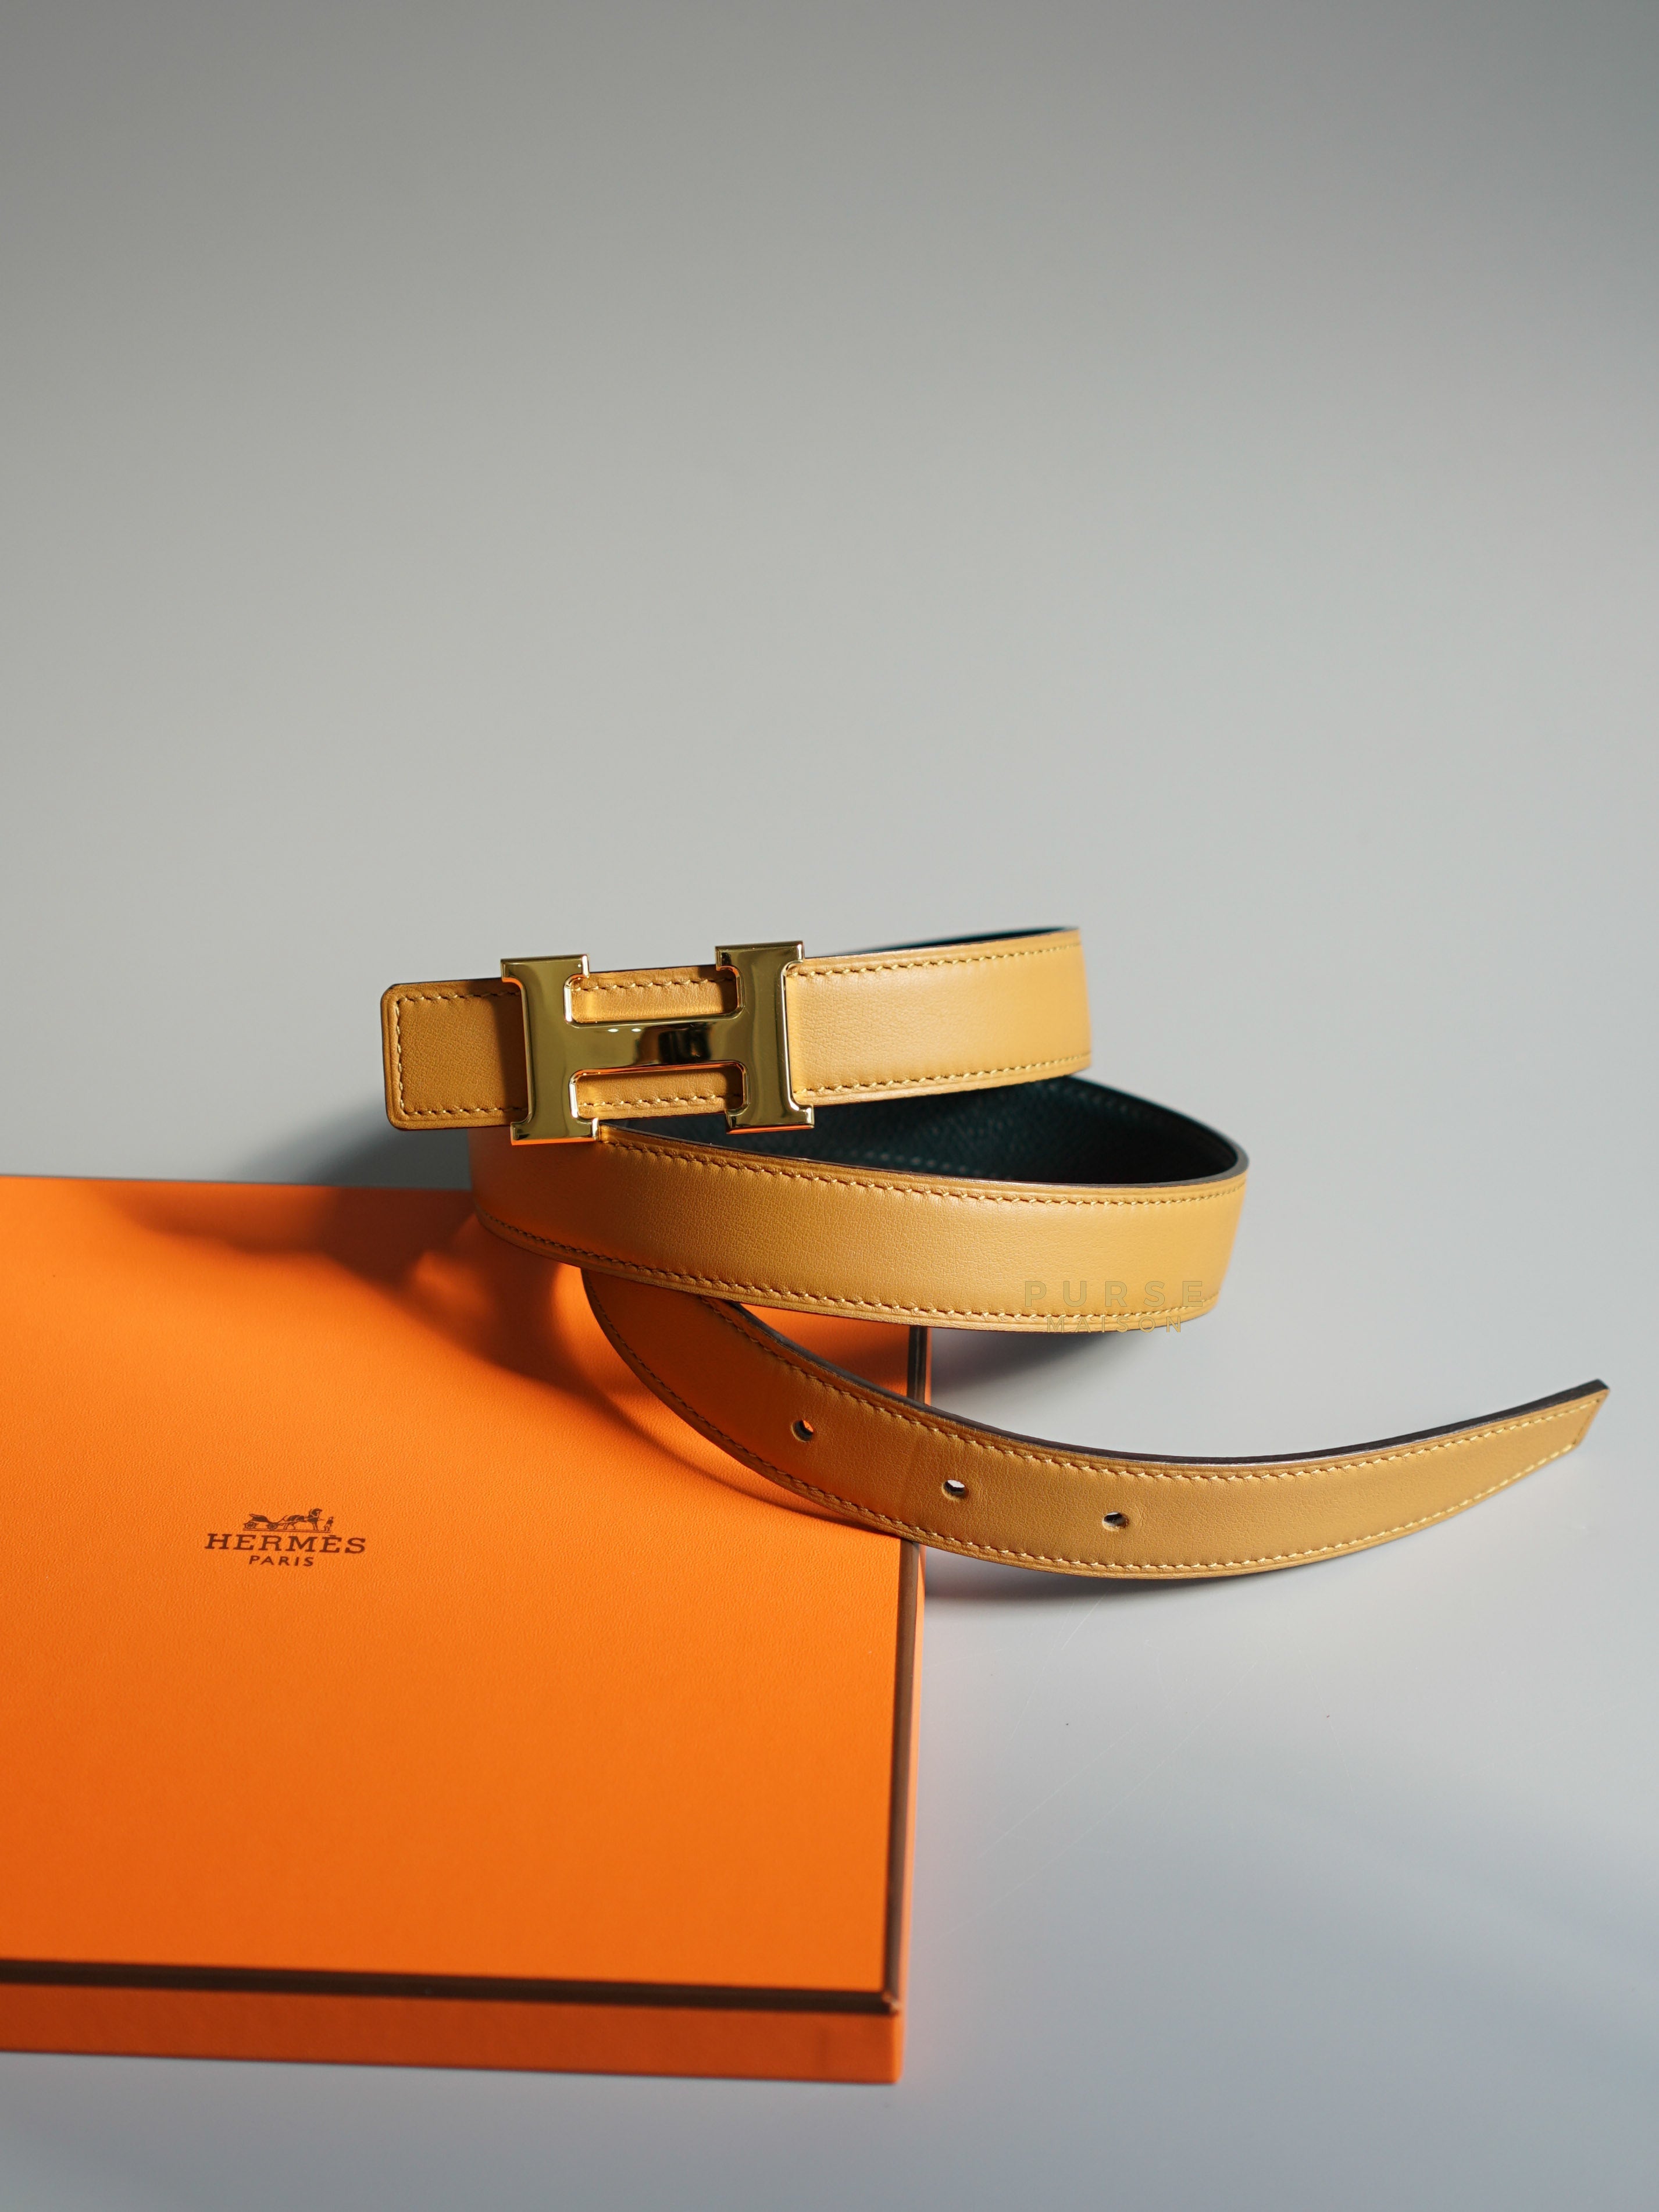 Hermes Constance H Buckle Gold and Reversible Leather Belt (75cm) Stamp B | Purse Maison Luxury Bags Shop